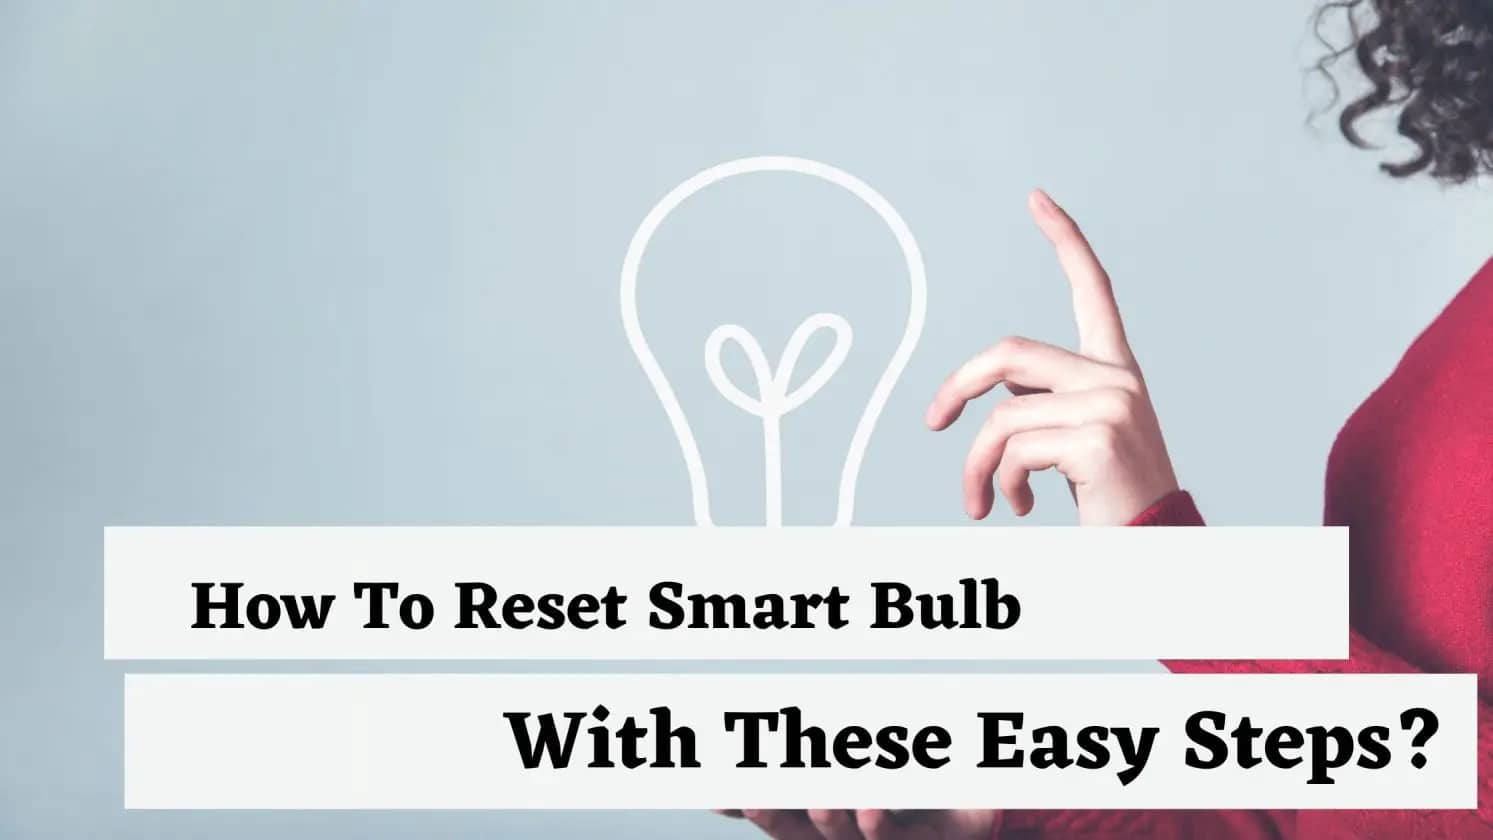 How To Reset Smart Bulb With These Easy Steps?